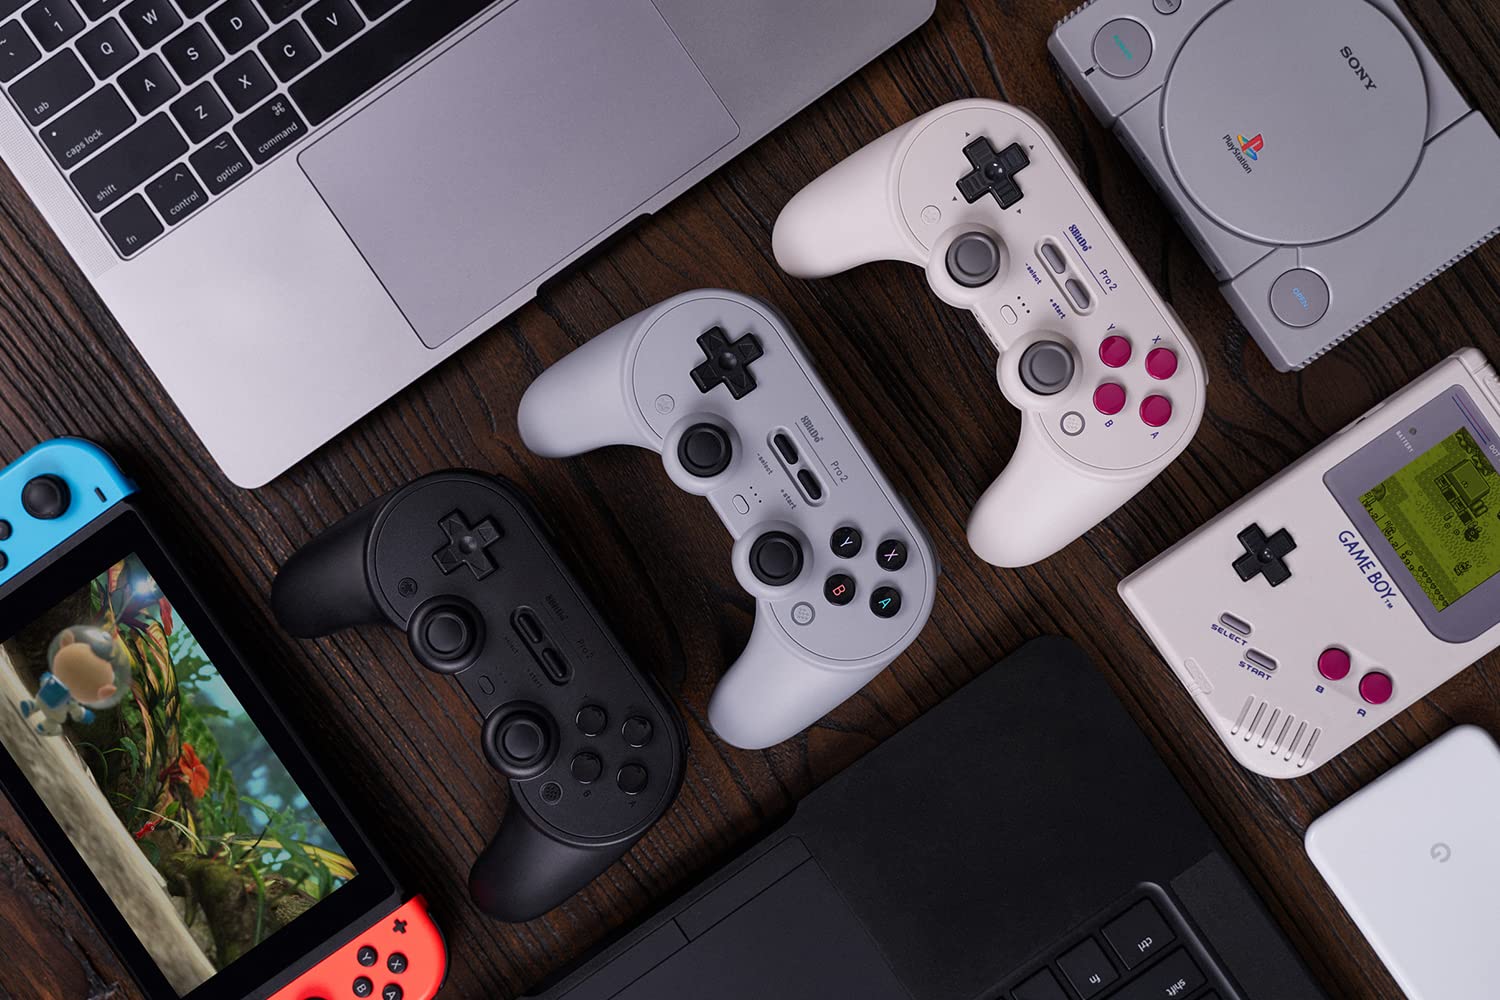 8BitDo Pro 2 Bluetooth Controller for Switch, PC, Android, Steam Deck, Gaming Controller for iPhone, iPad, macOS and Apple TV (Gray Edition)